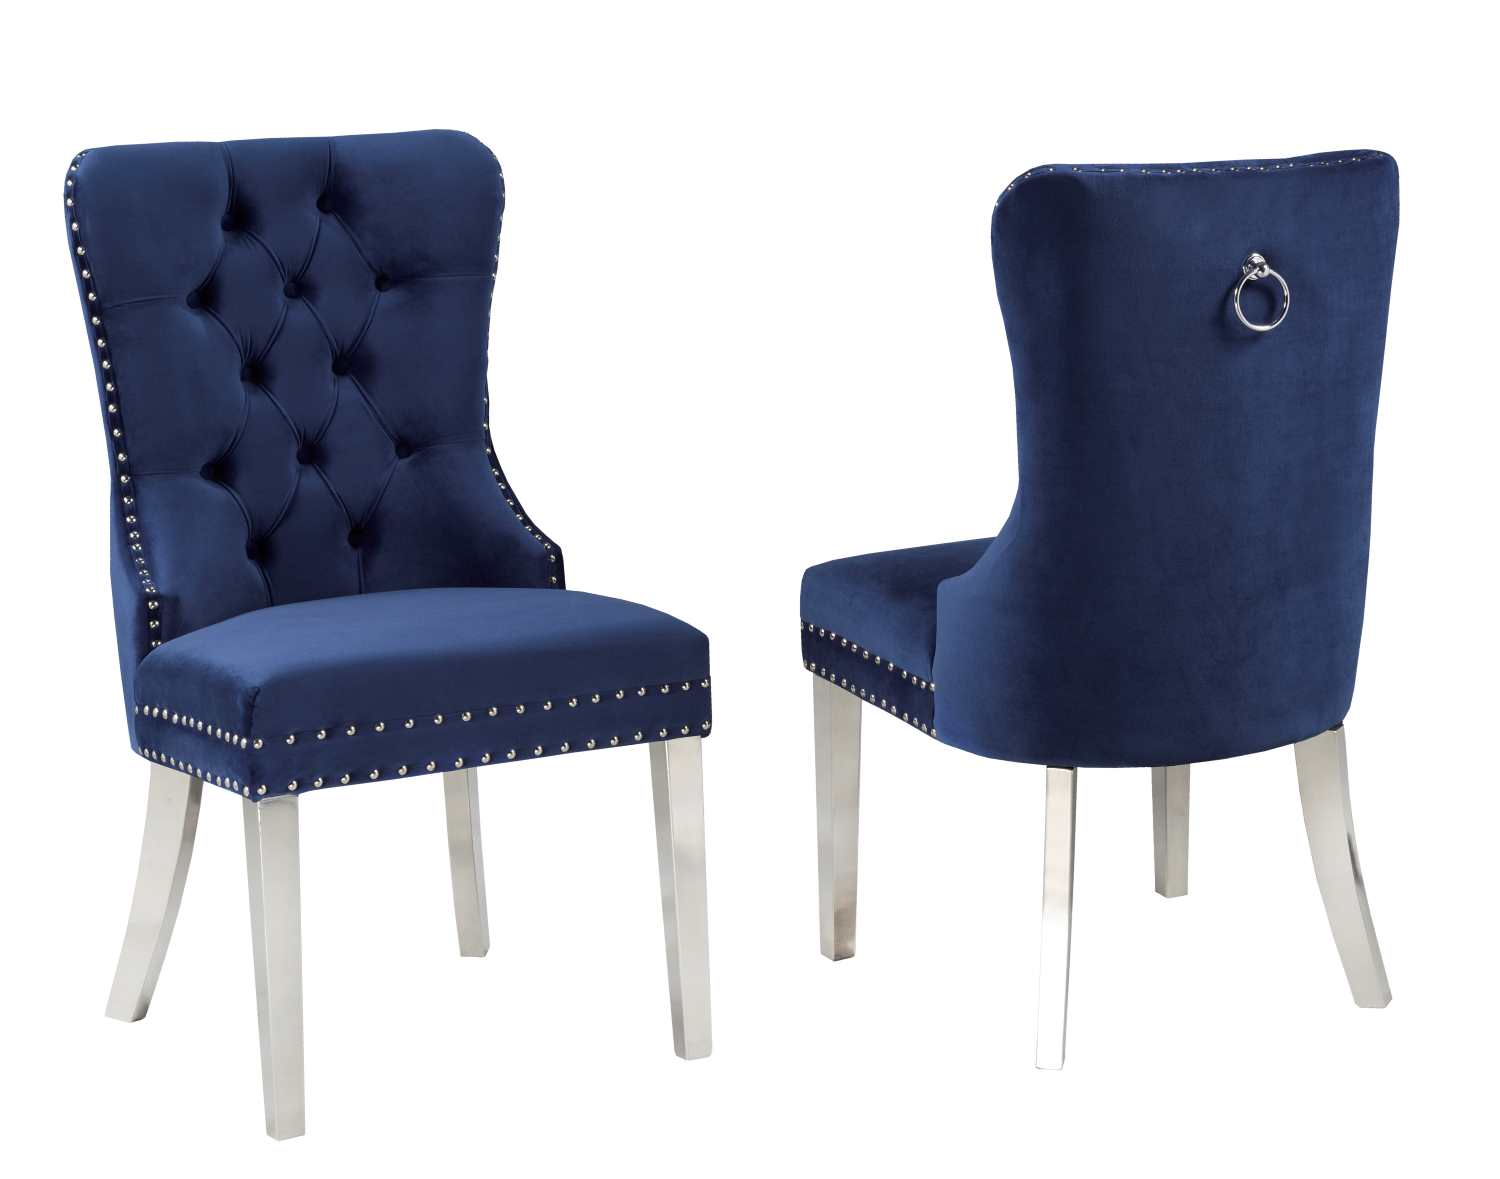 Navy Dining Chair W/ Chrome Legs F459-BL (Set of 2)